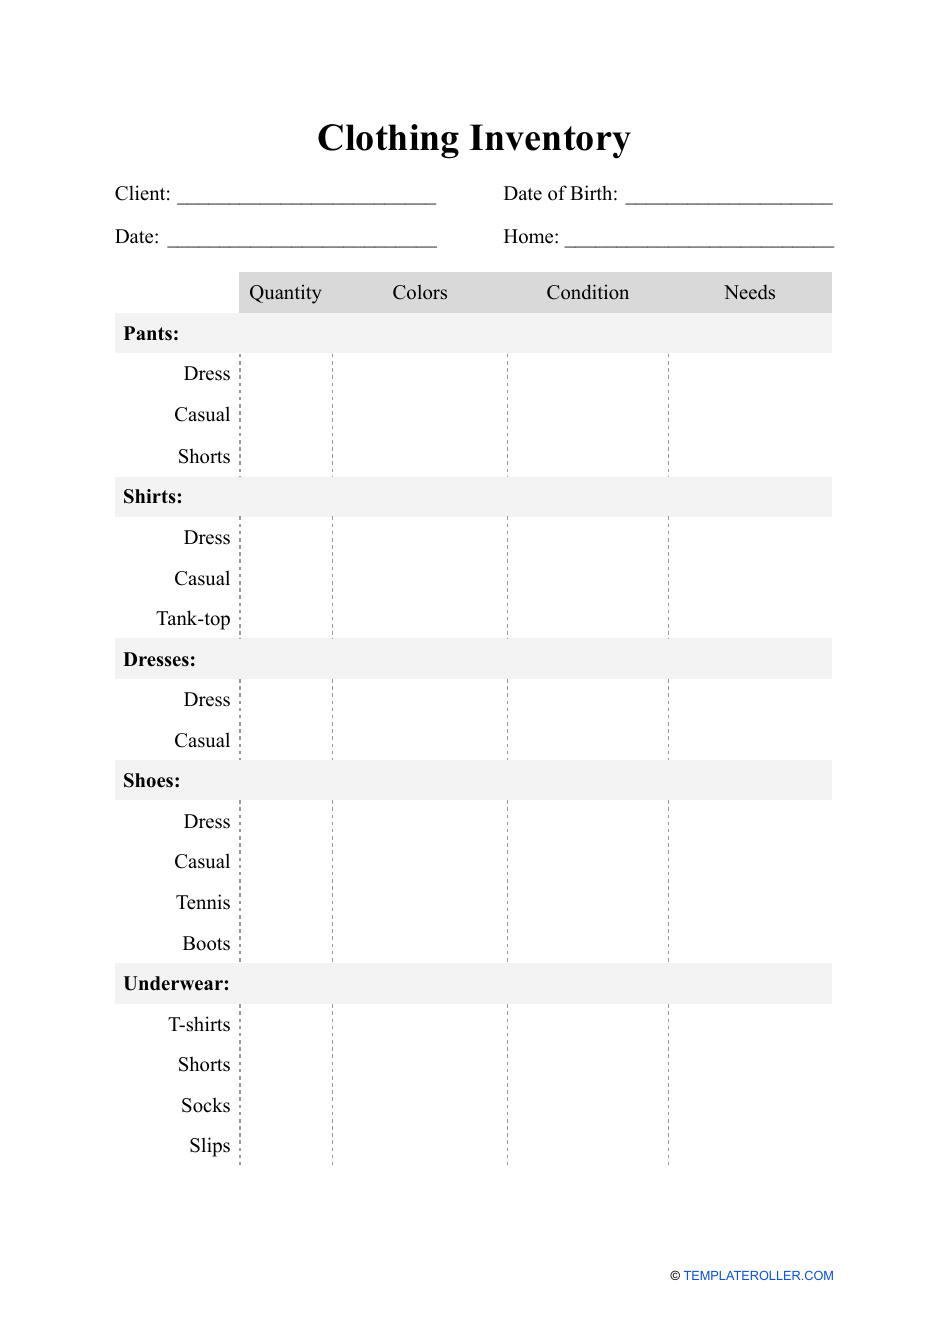 Clothing Inventory Spreadsheet Template Download Printable PDF Regarding Business Process Inventory Template